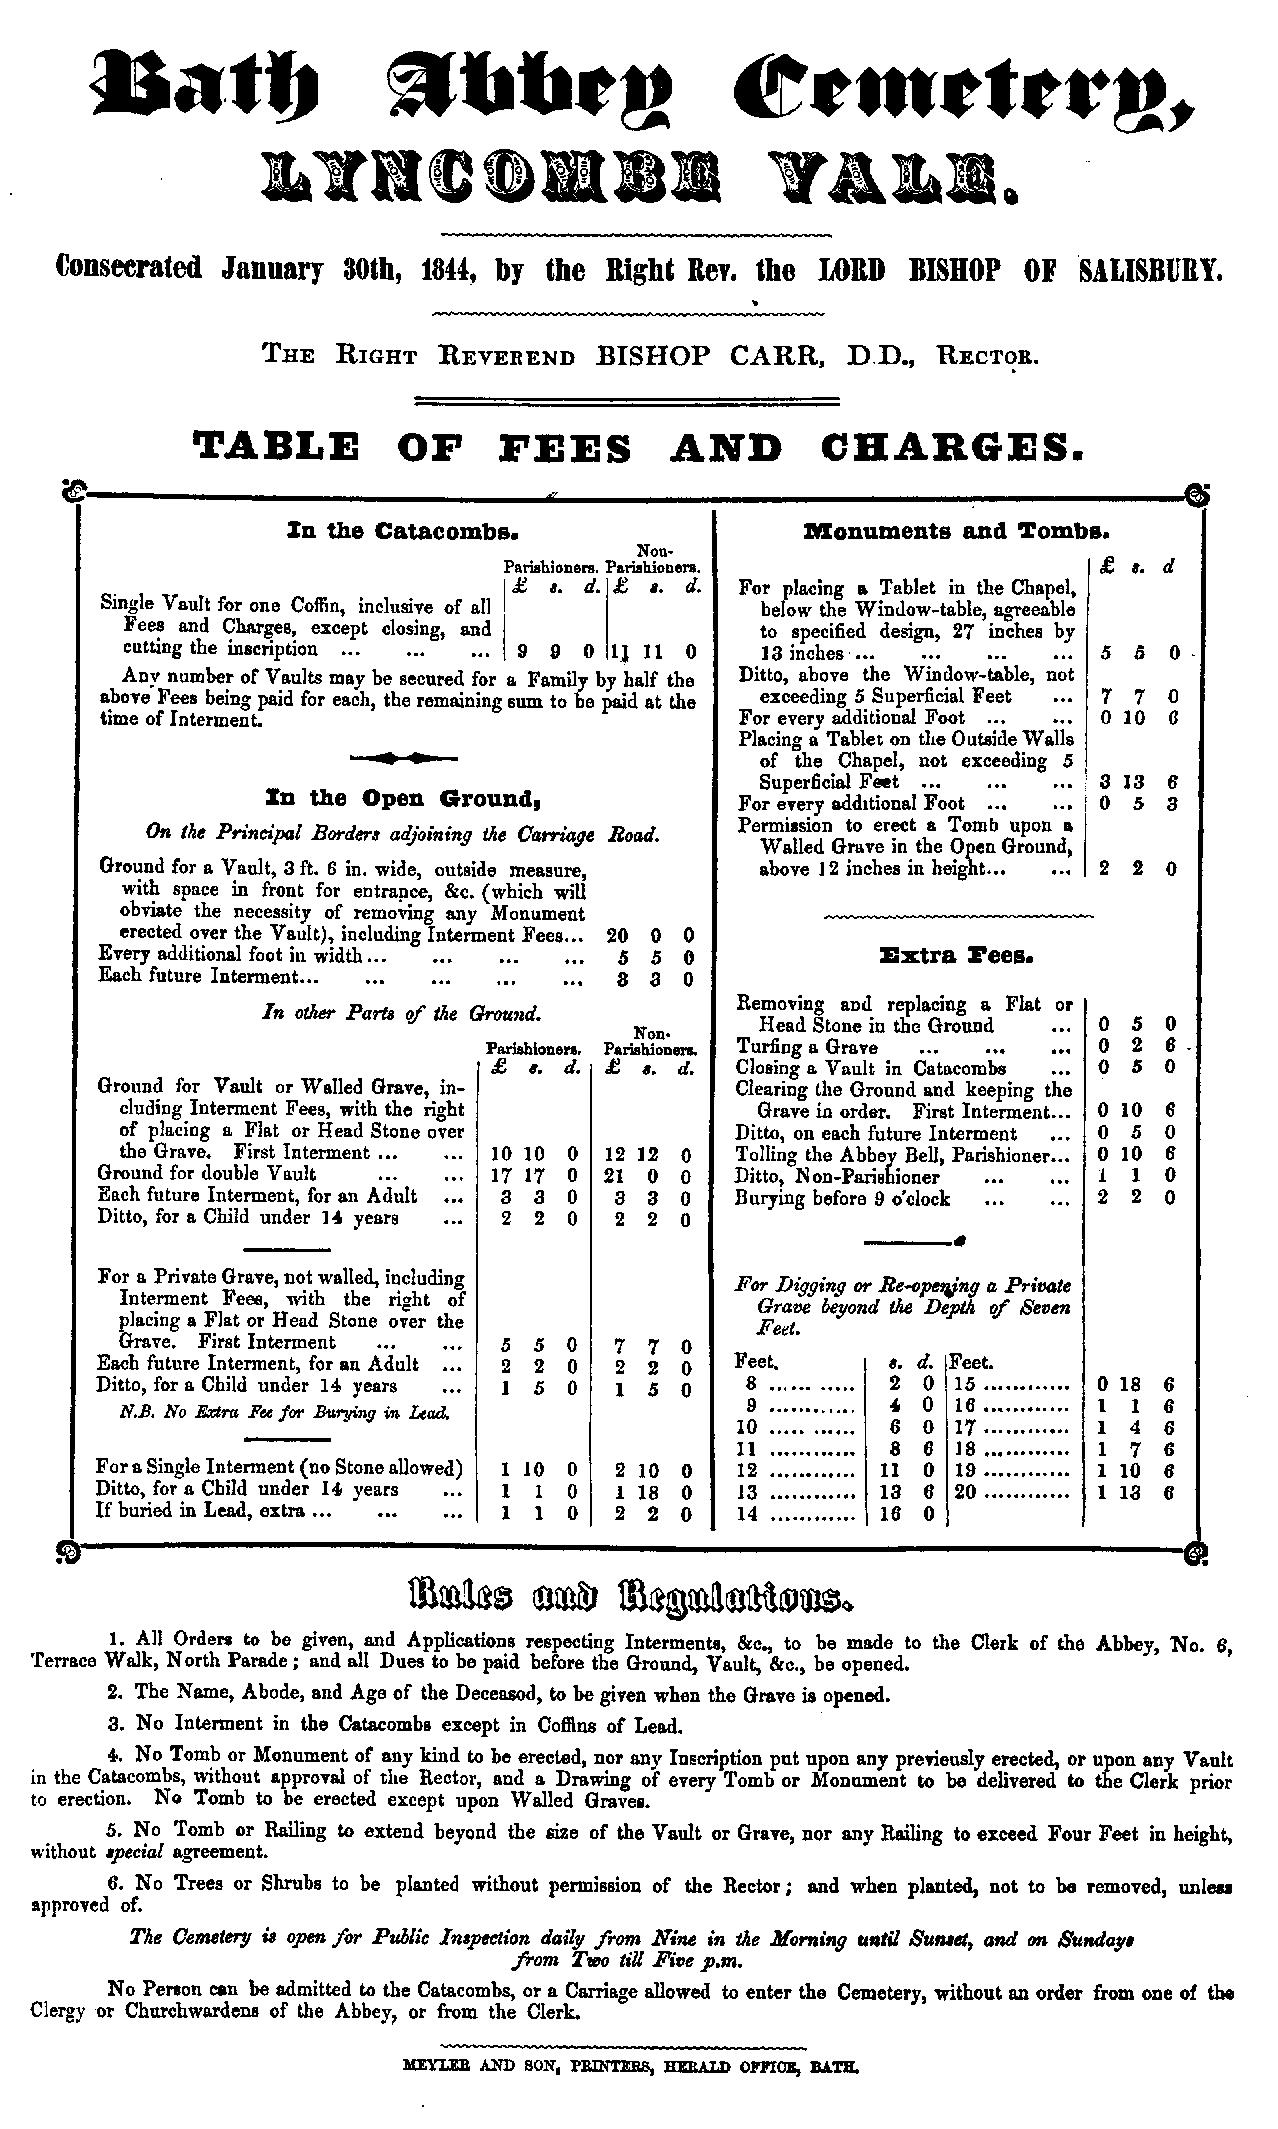 Price list from the time that Thomas Carr was Rector (1855 - 1859).jpg